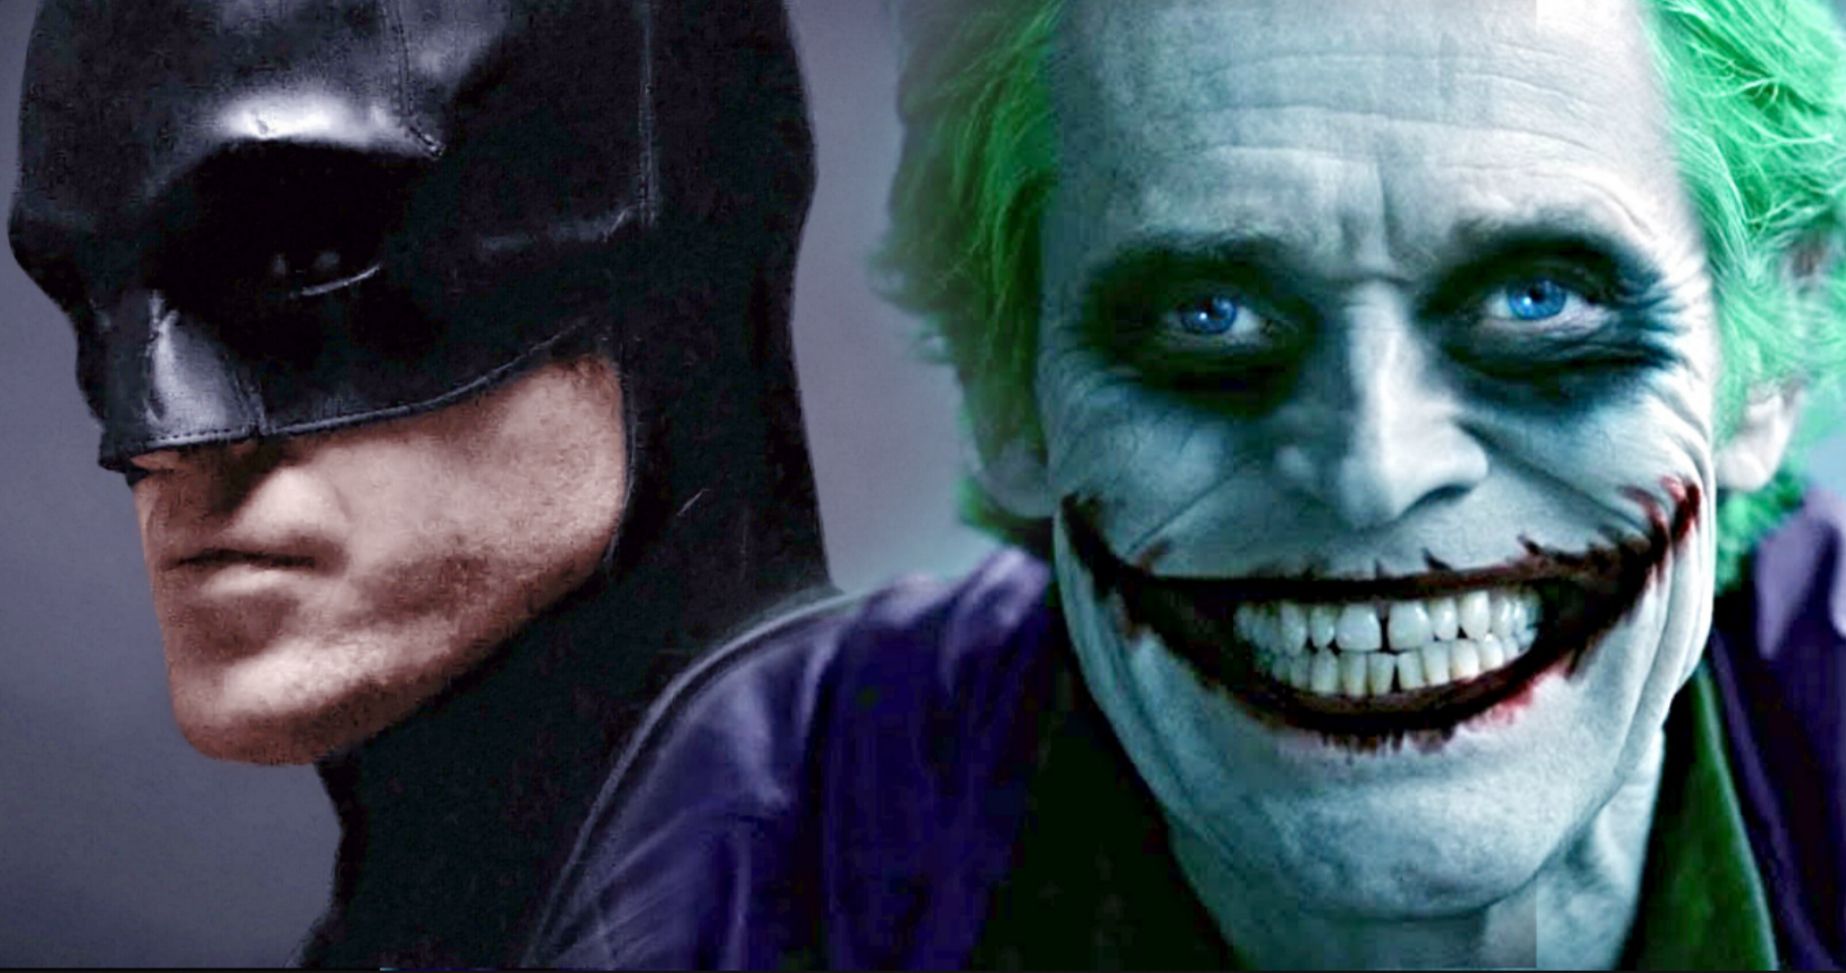 Will The Batman Let Willem Dafoe Be the Next Joker? The Lighthouse Fans Sure Hope So